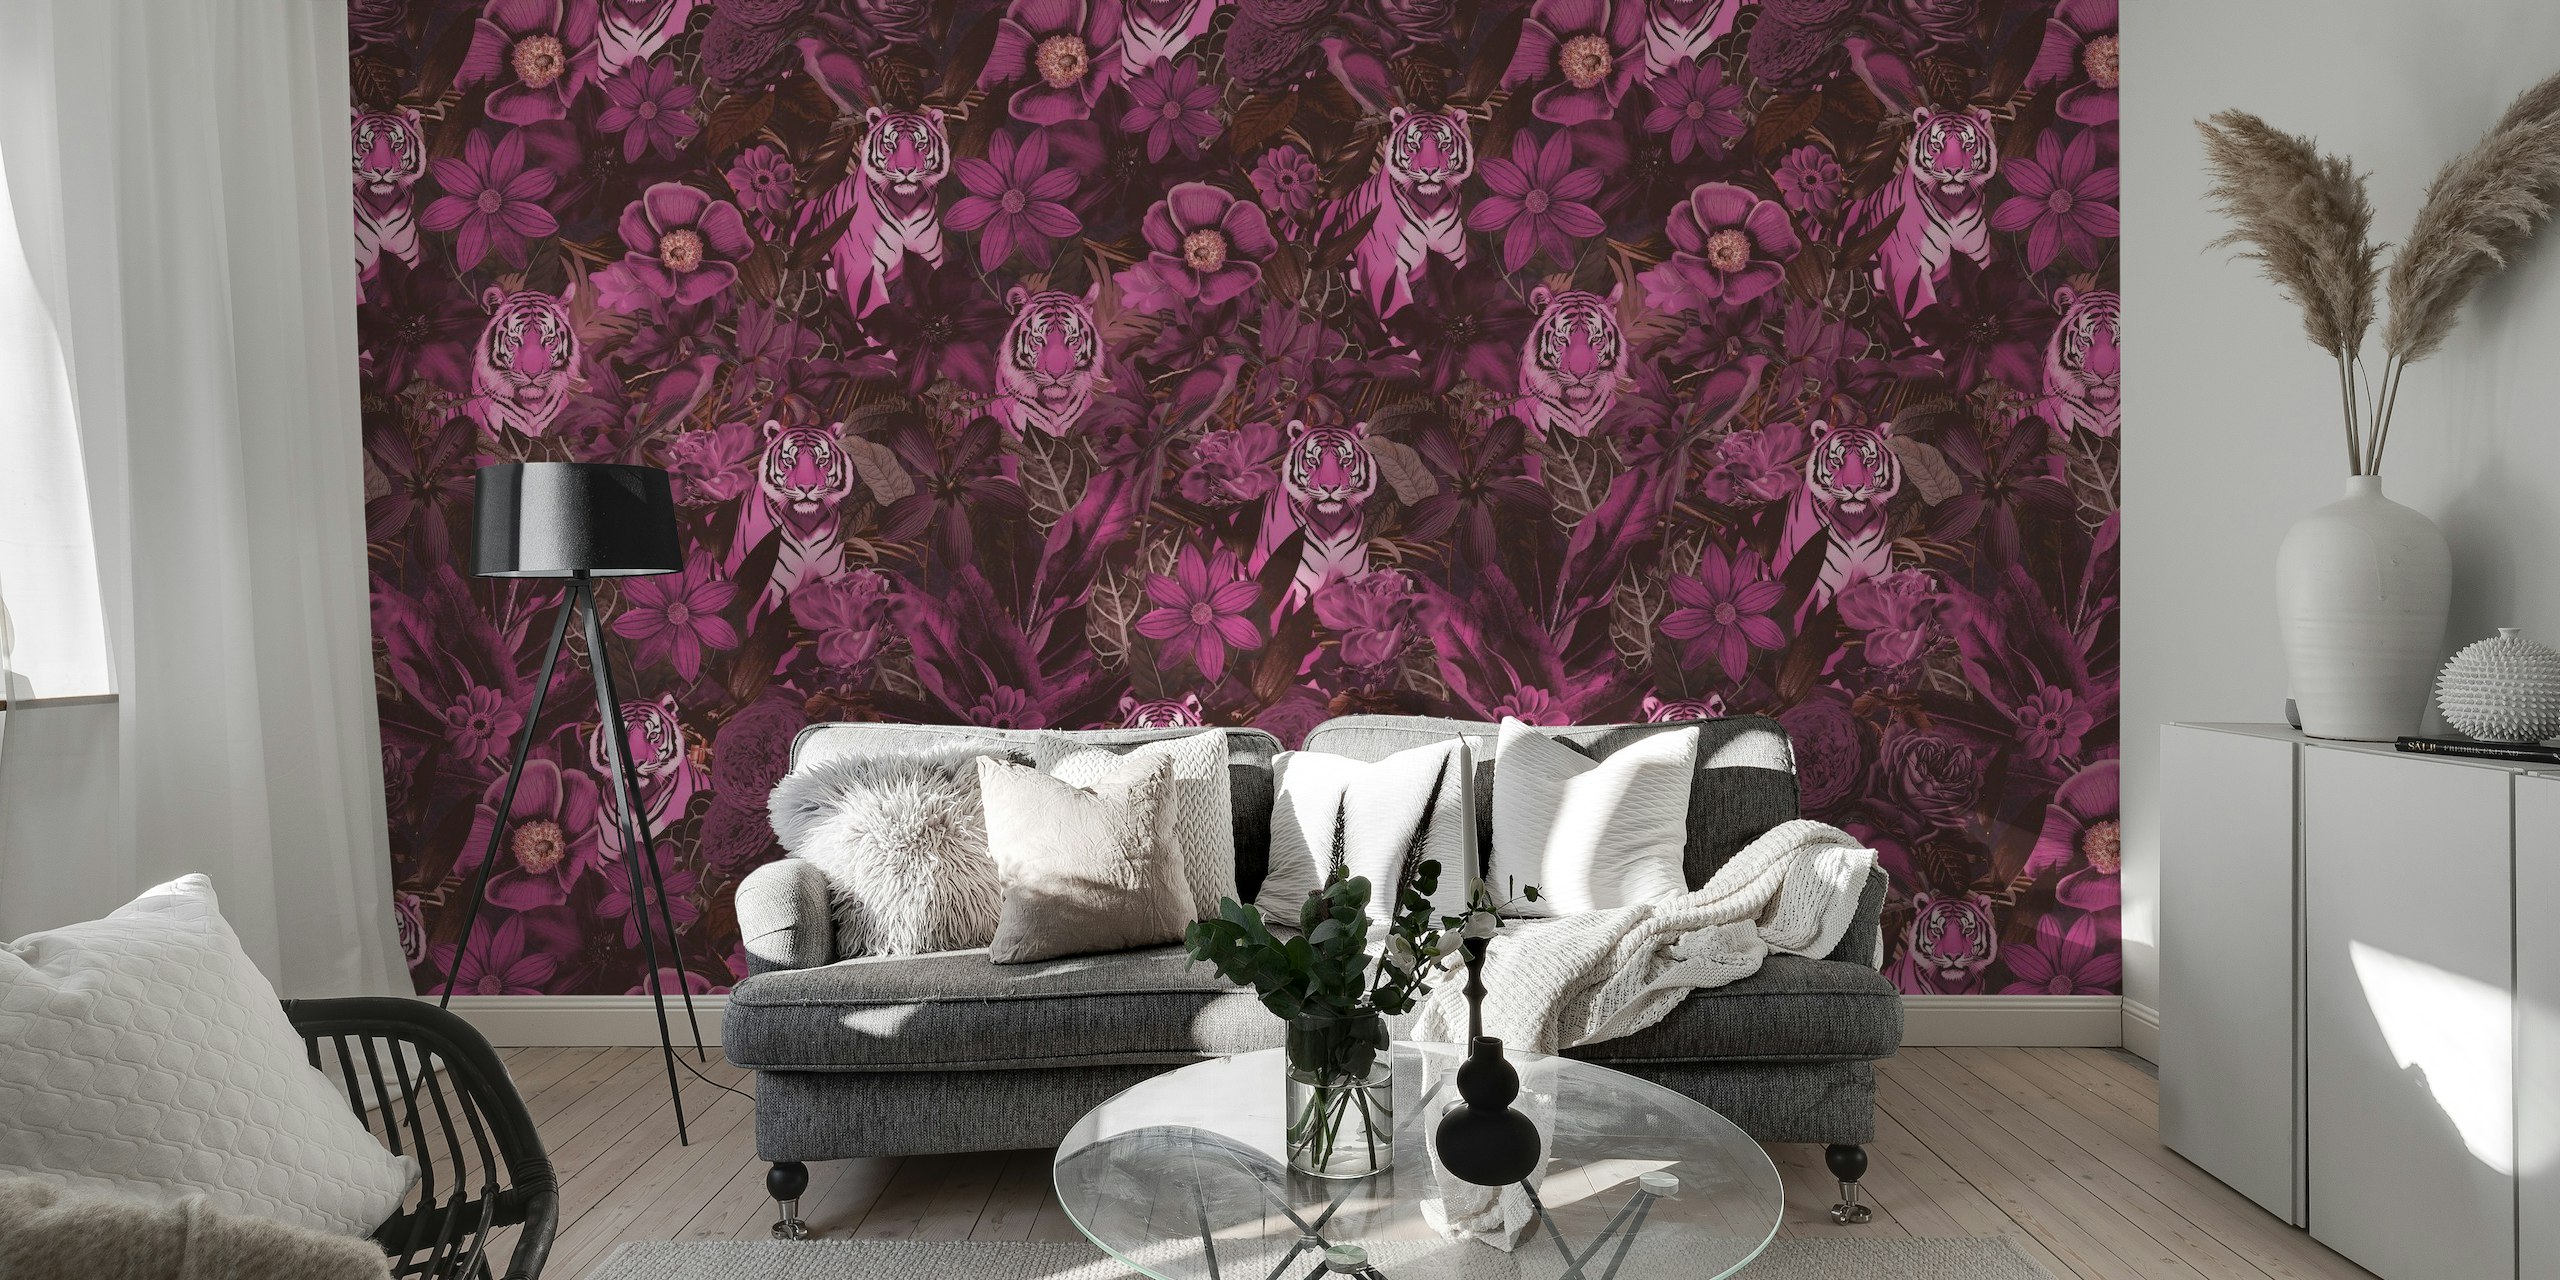 Fancy Jungle Opulence With Tigers papel pintado